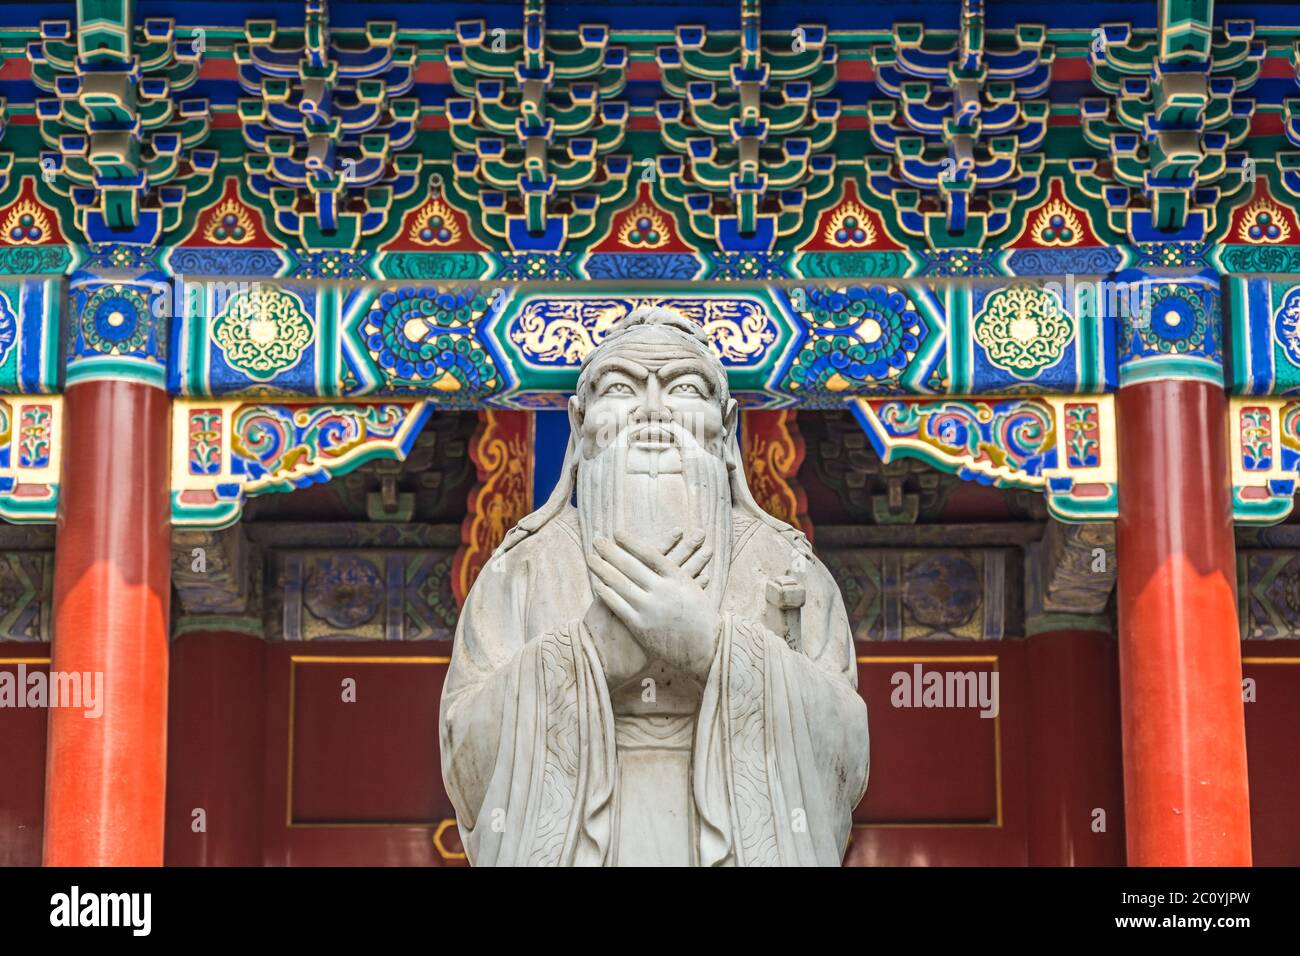 Confucius statue in front of colorful ancient temple with beautiful ornaments Stock Photo